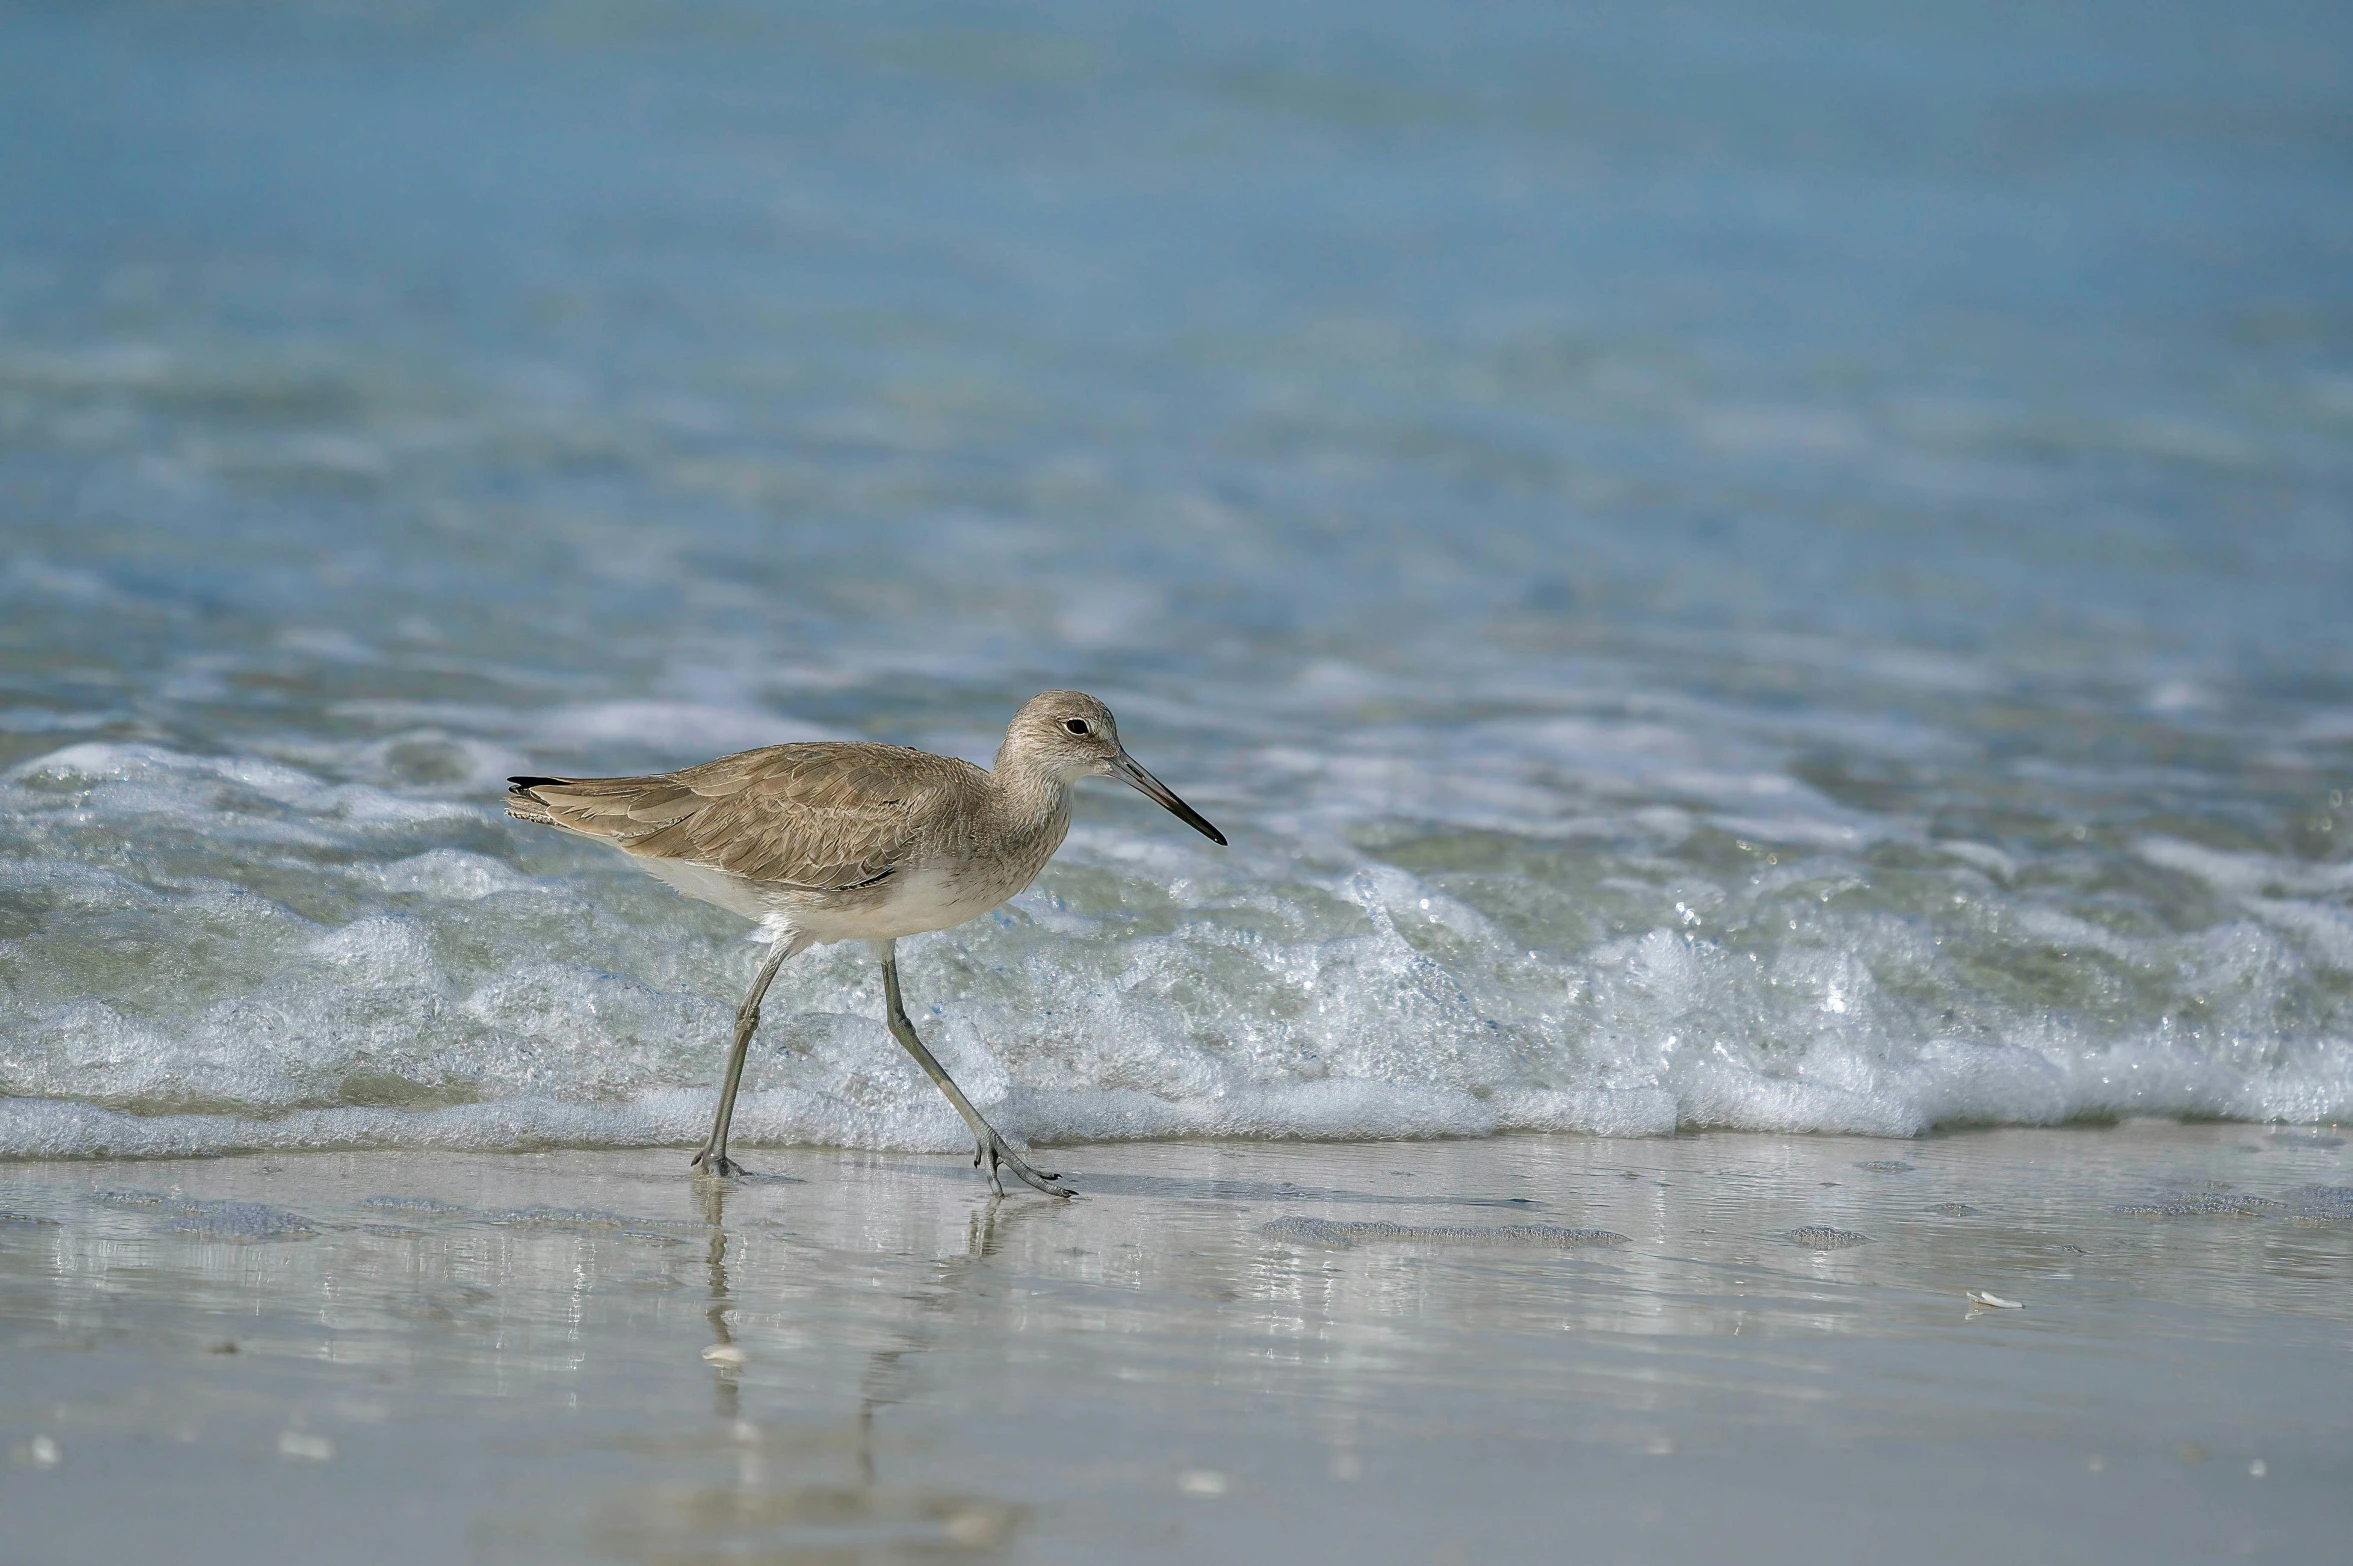 a small bird walking in the sand by the beach